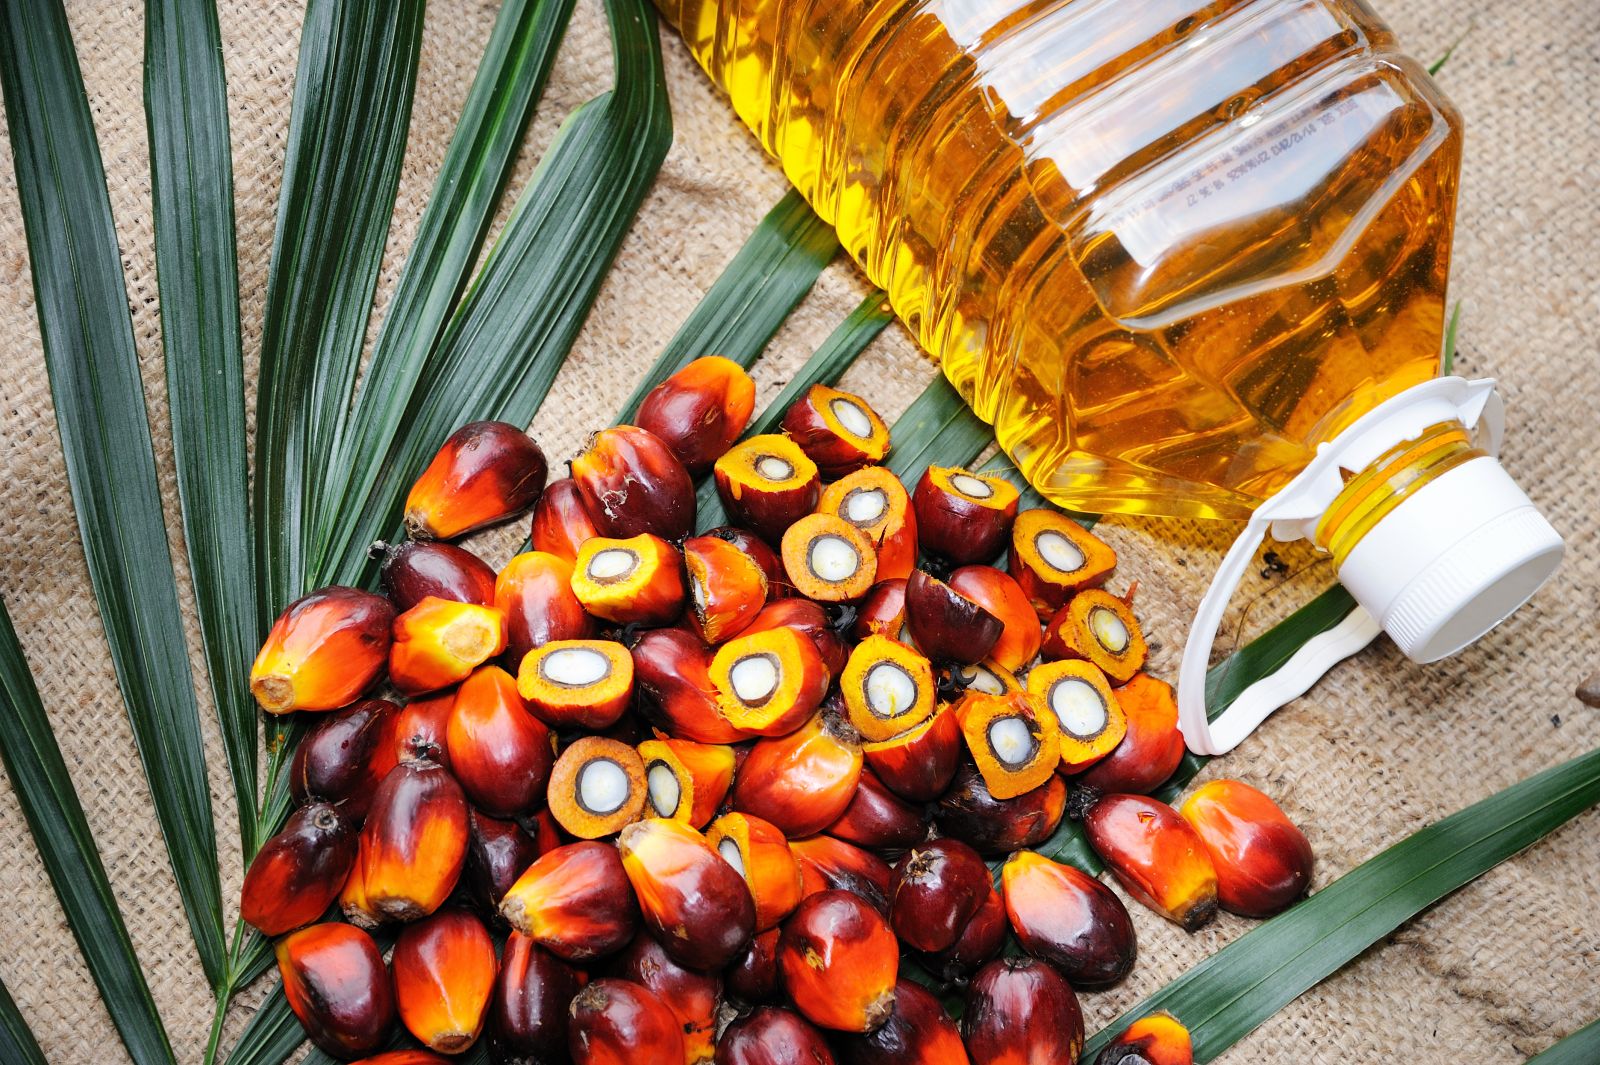 By the way, doctor: Is palm oil good for you? - Harvard Health